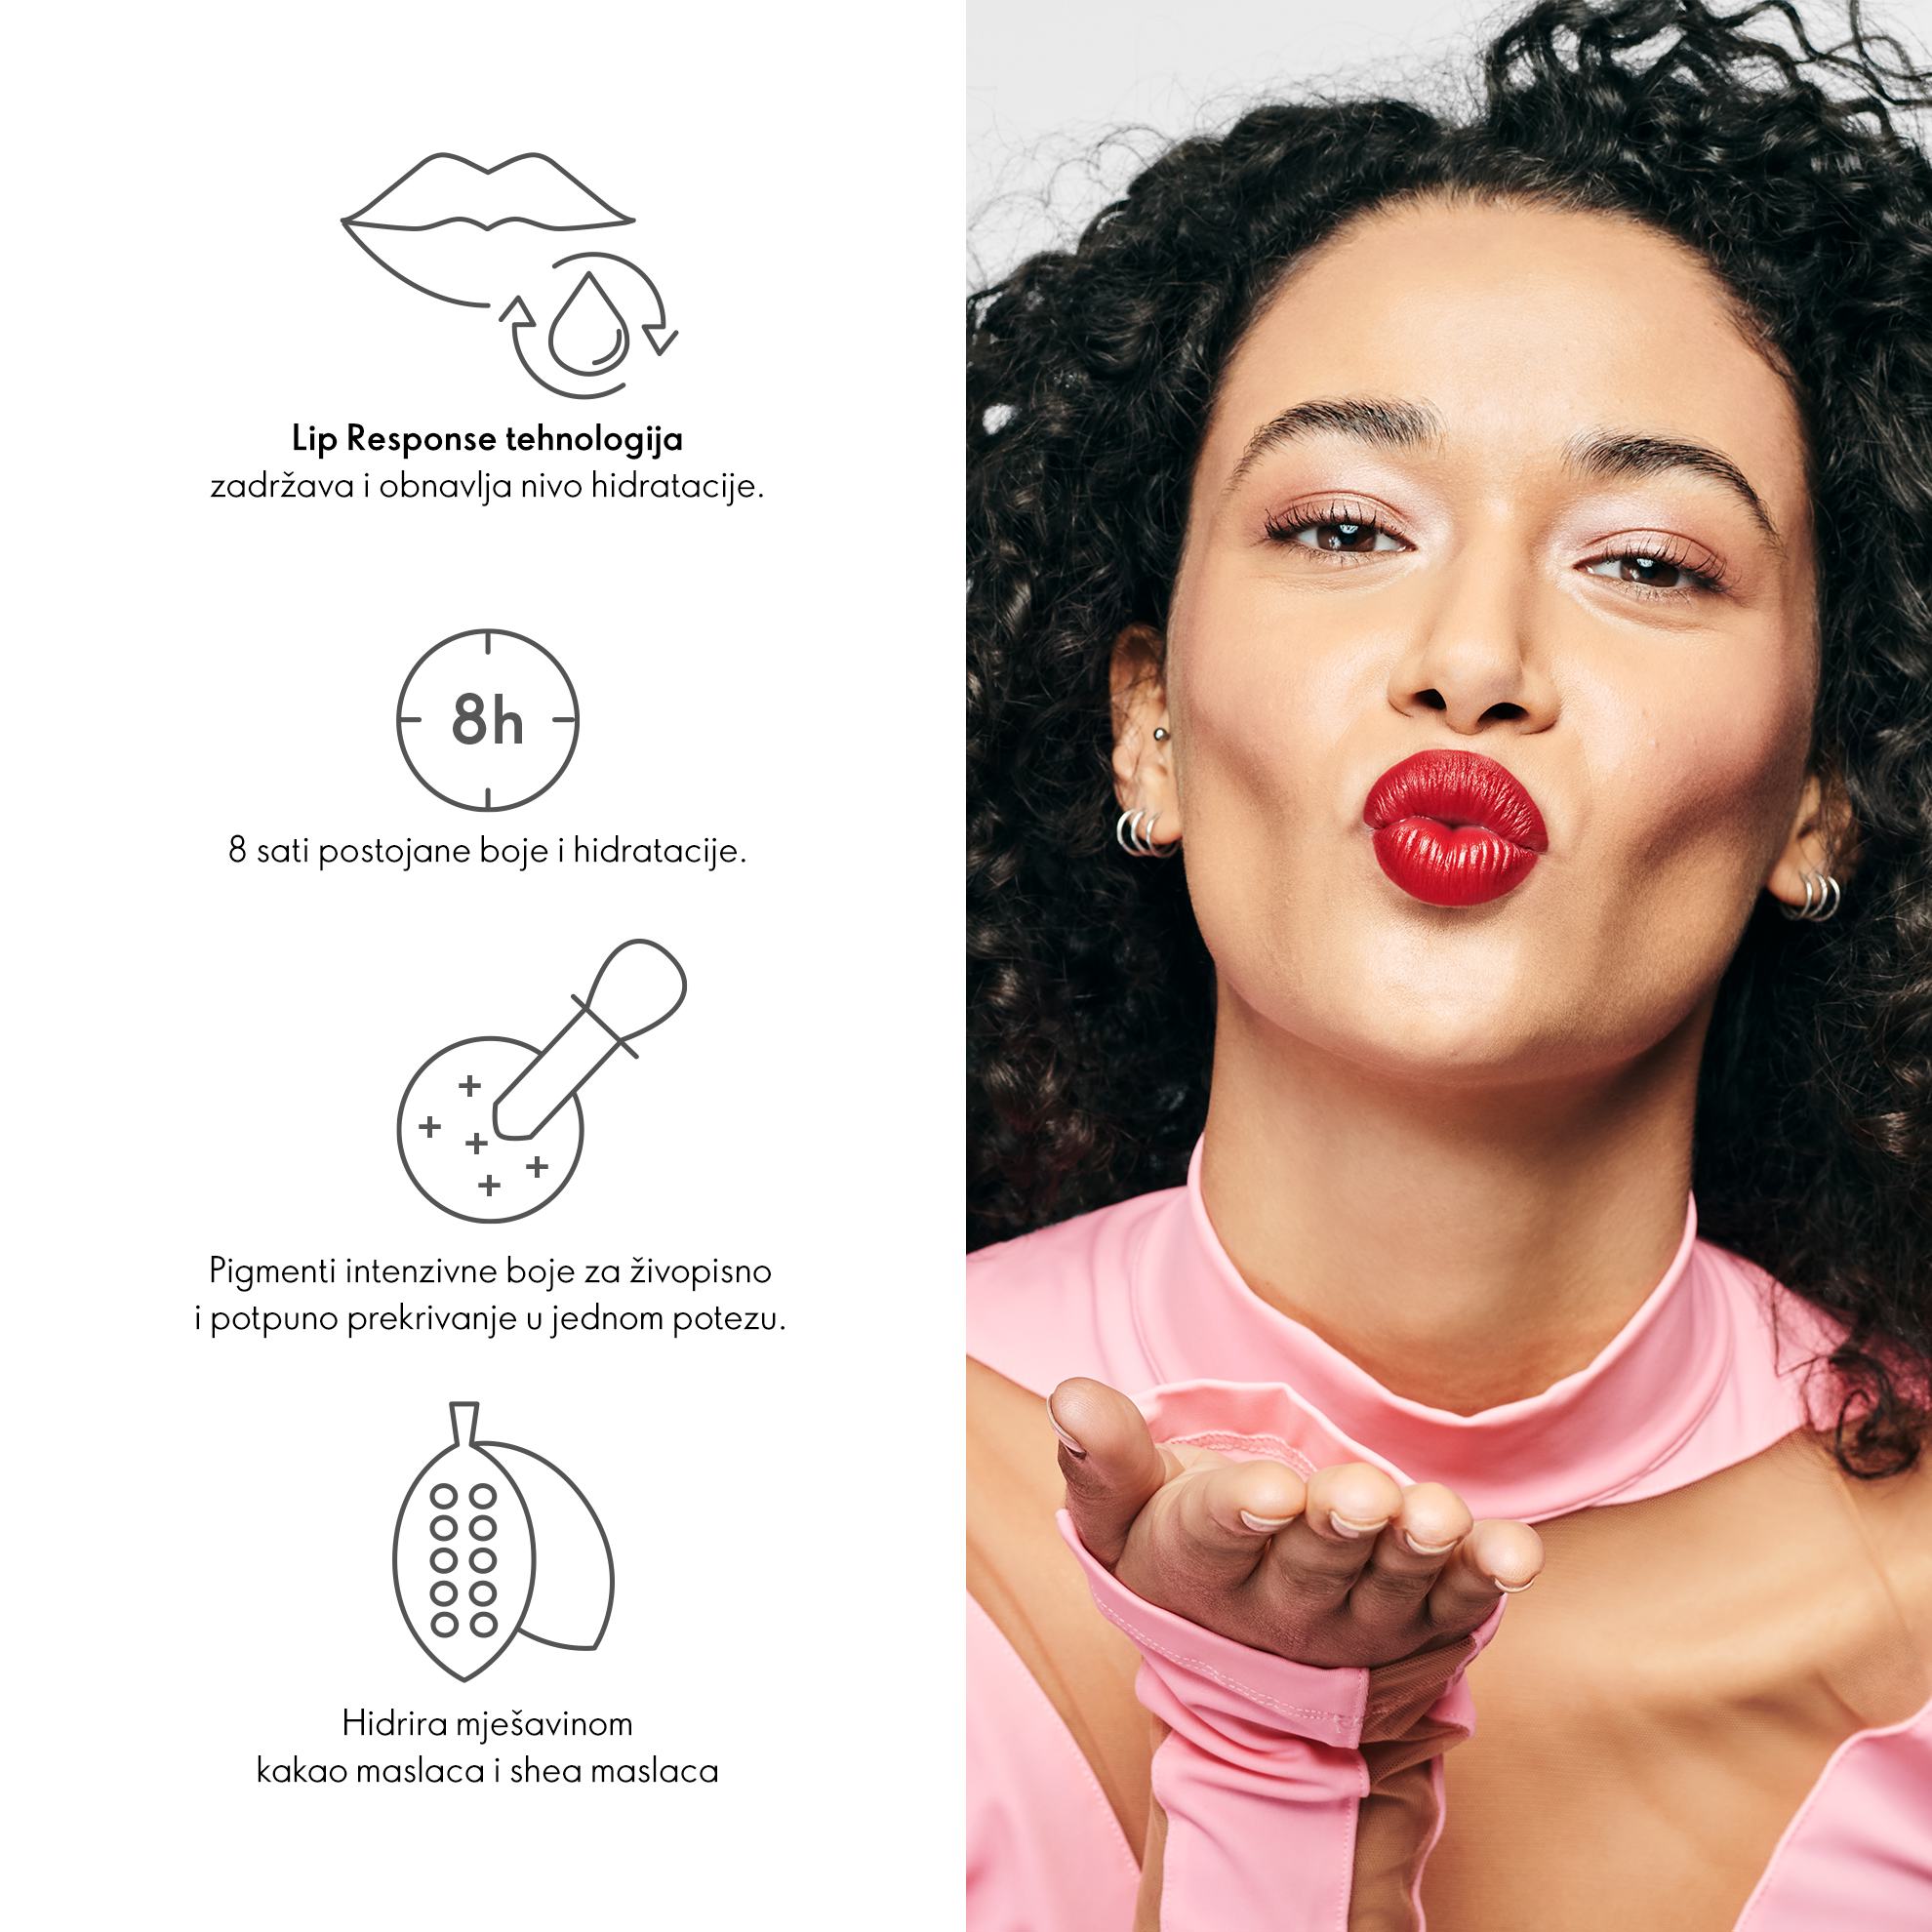 https://media-cdn.oriflame.com/productImage?externalMediaId=product-management-media%2fProducts%2f46441%2fBA%2f46441_2.png&id=18912920&version=3